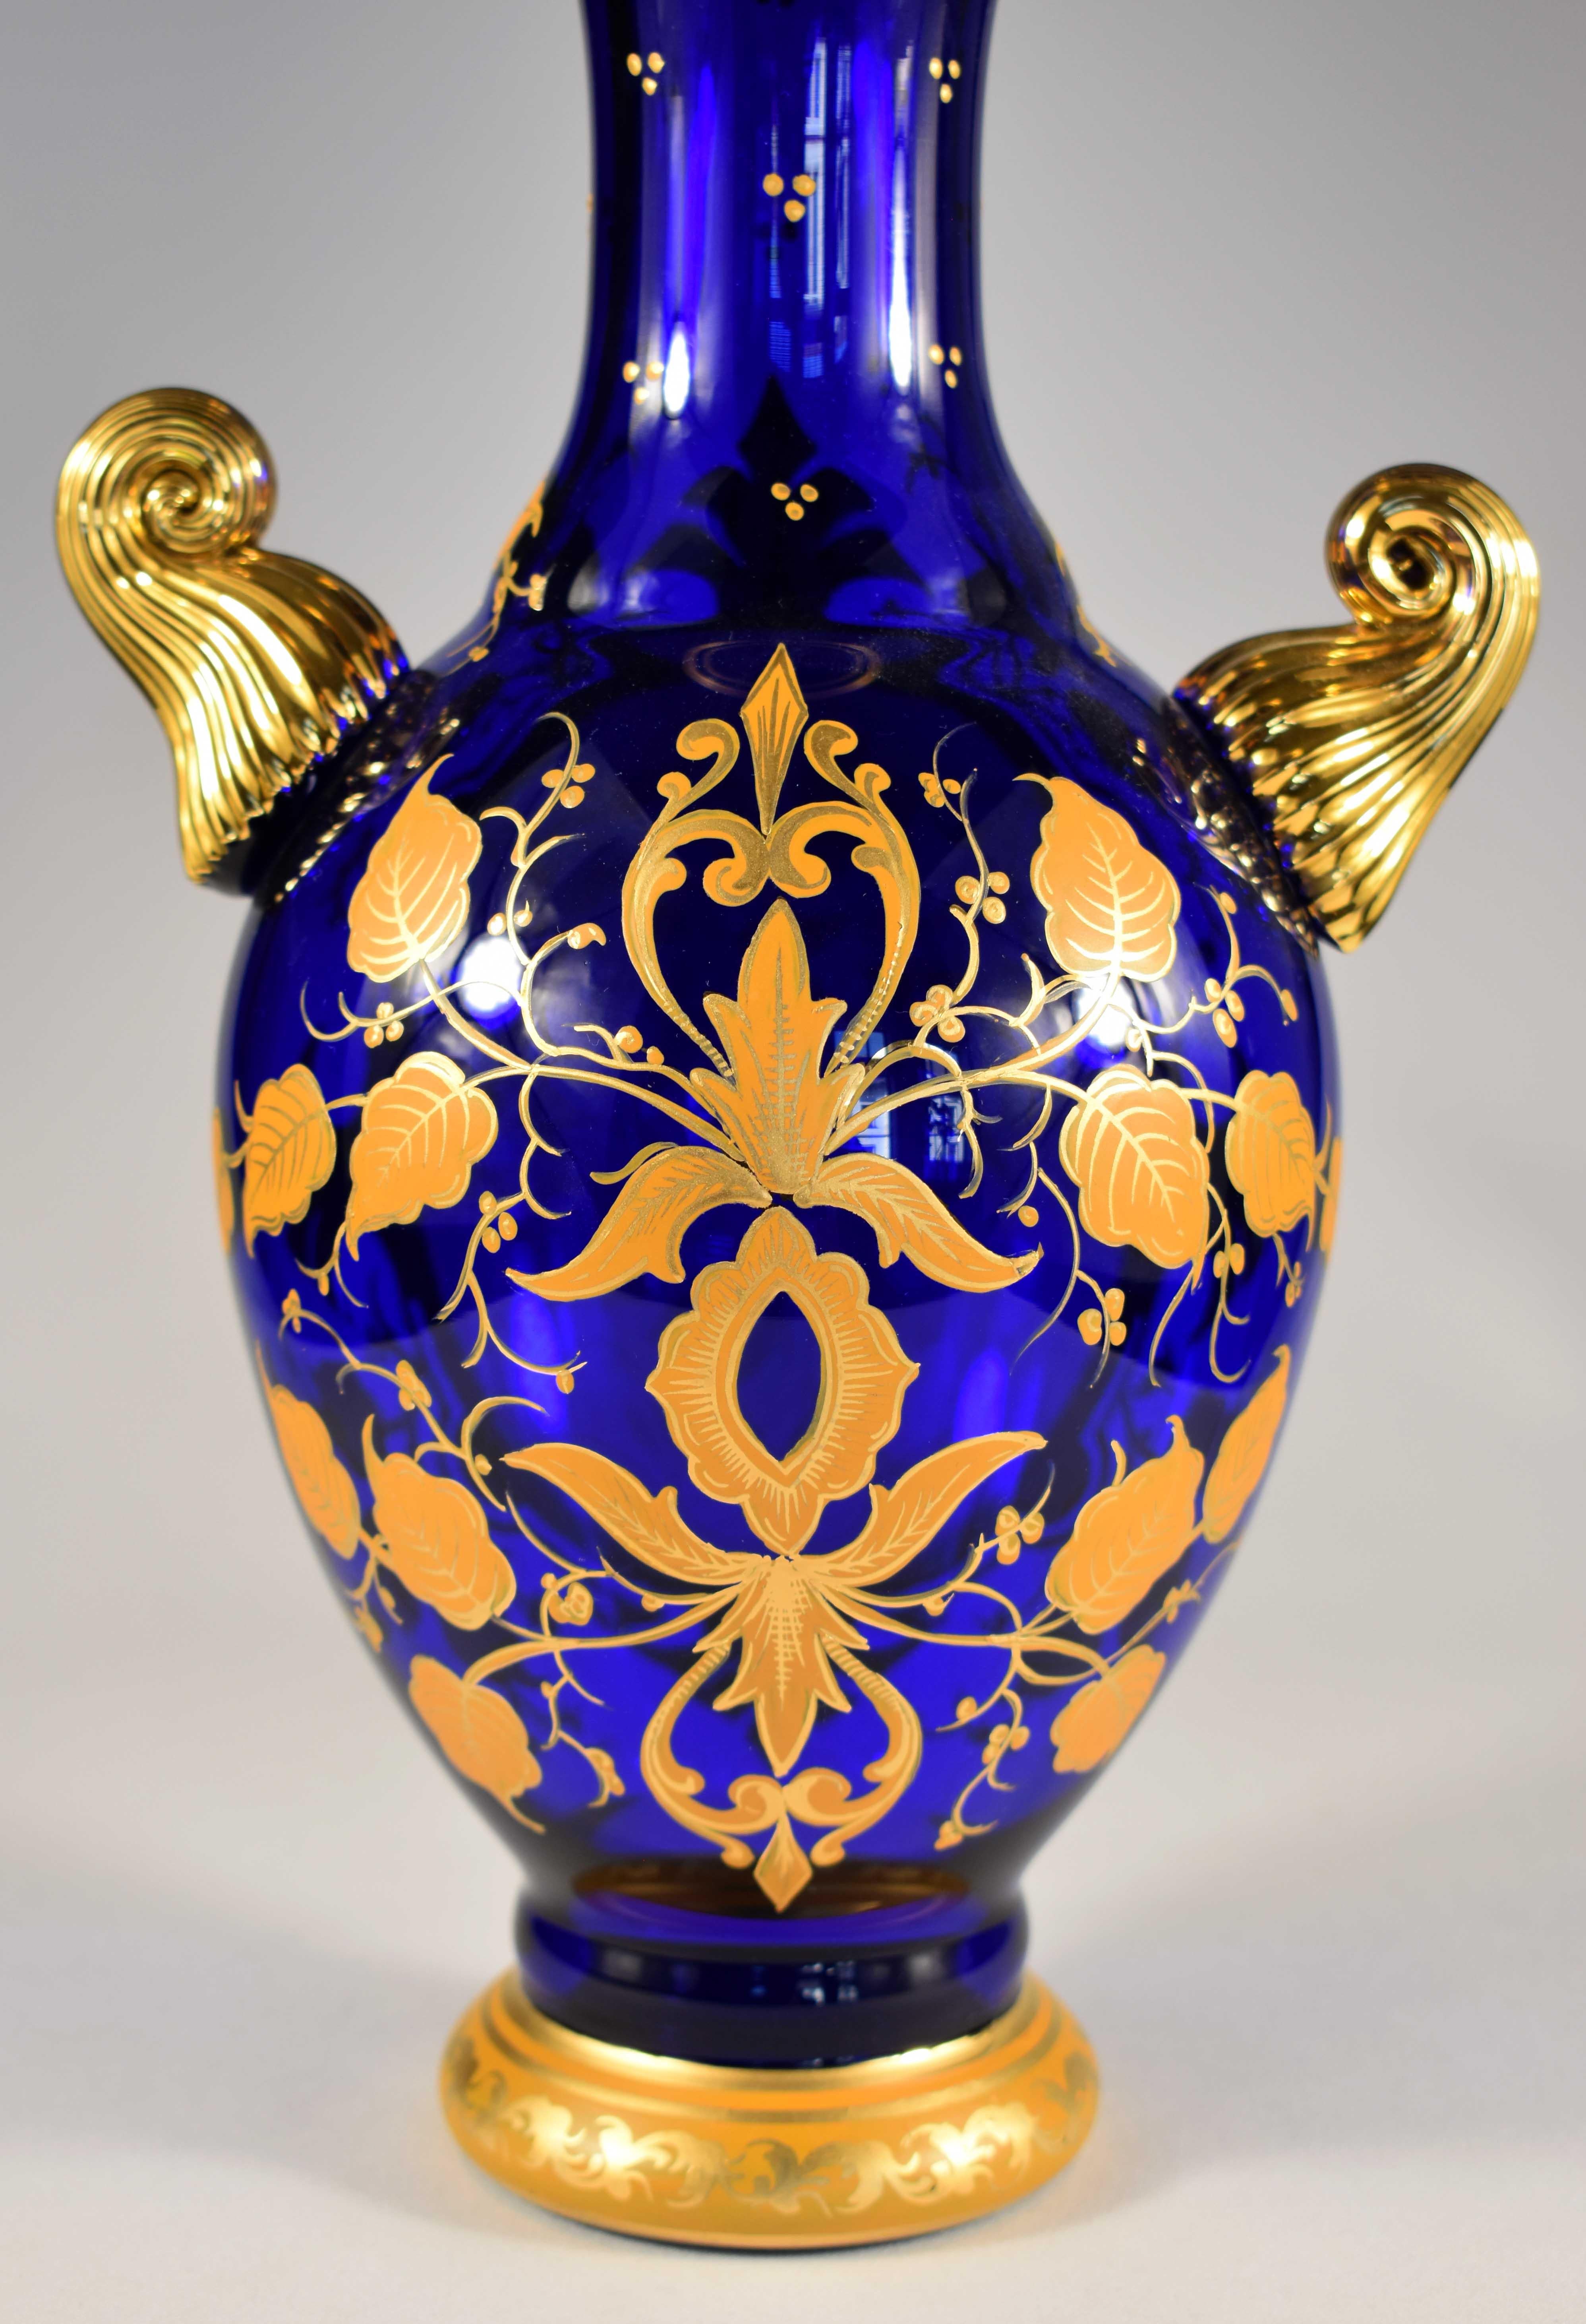 Pair of Blue Hand-Painted and Gilded Vases, Bohemian Glass 20h Century For Sale 11